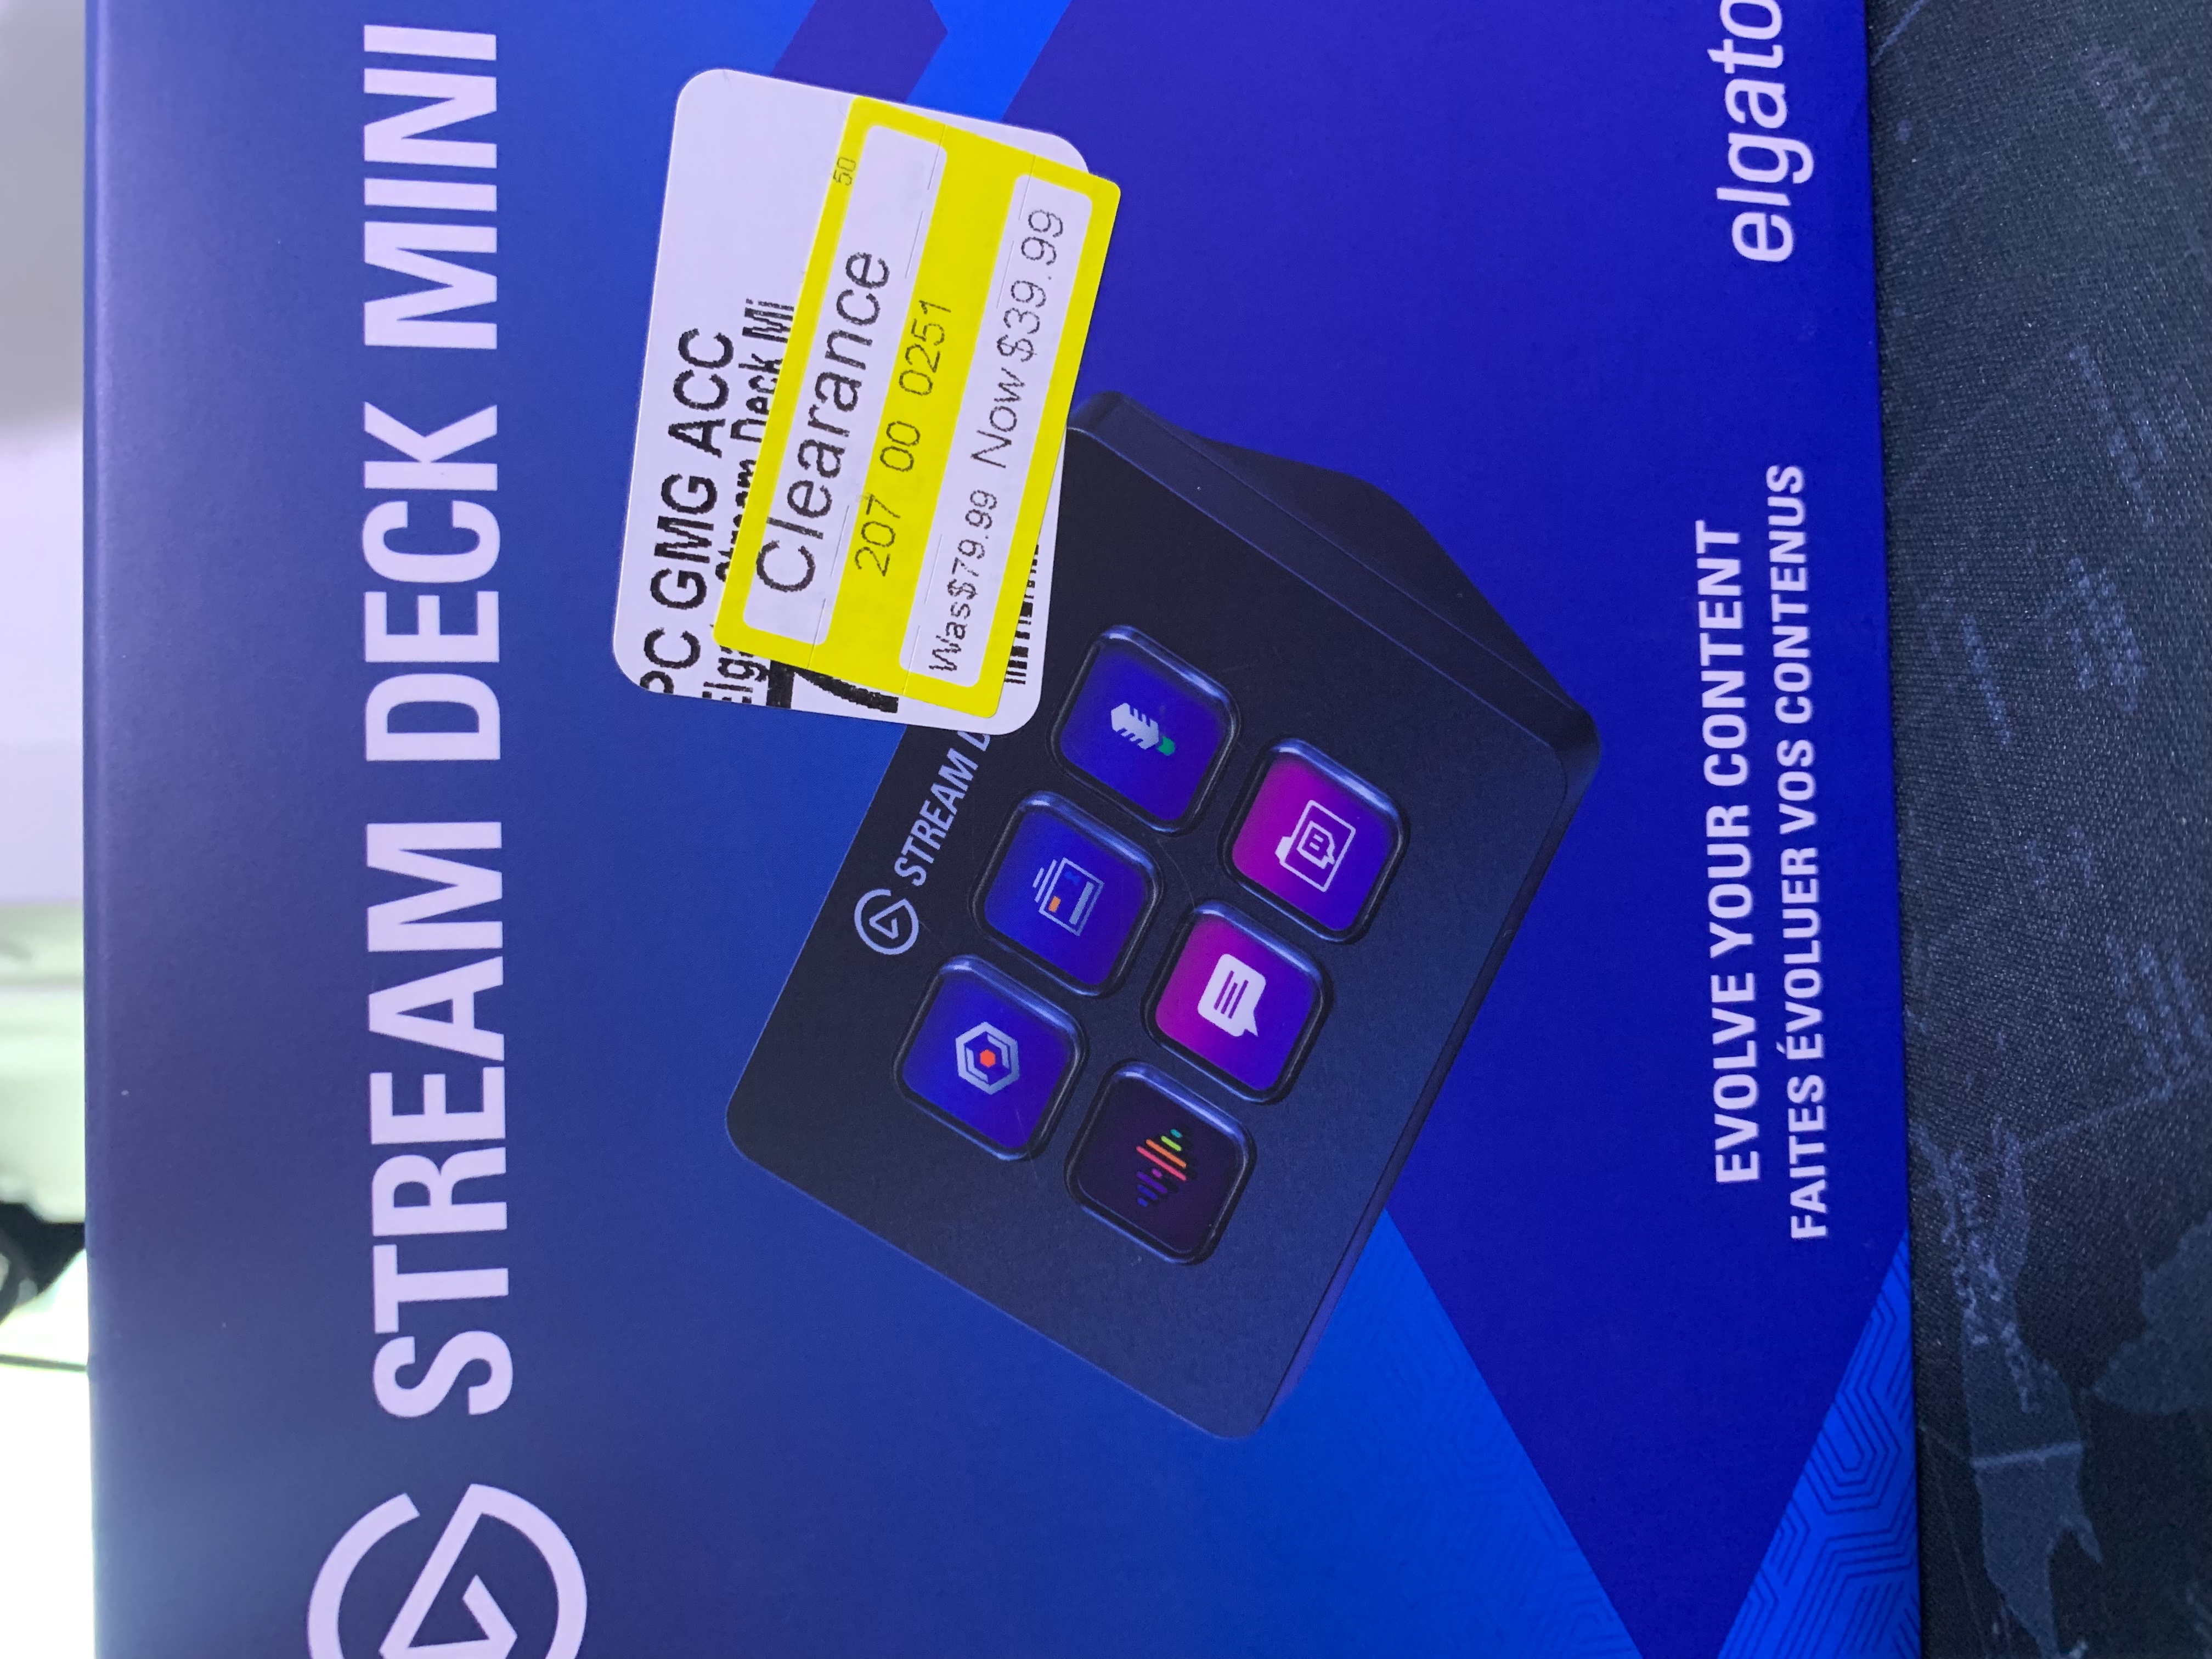 YMMV - ELGATO STREAM DECK MINI Target IN-STORE Clearance $23.99 Your  Mileage May Vary